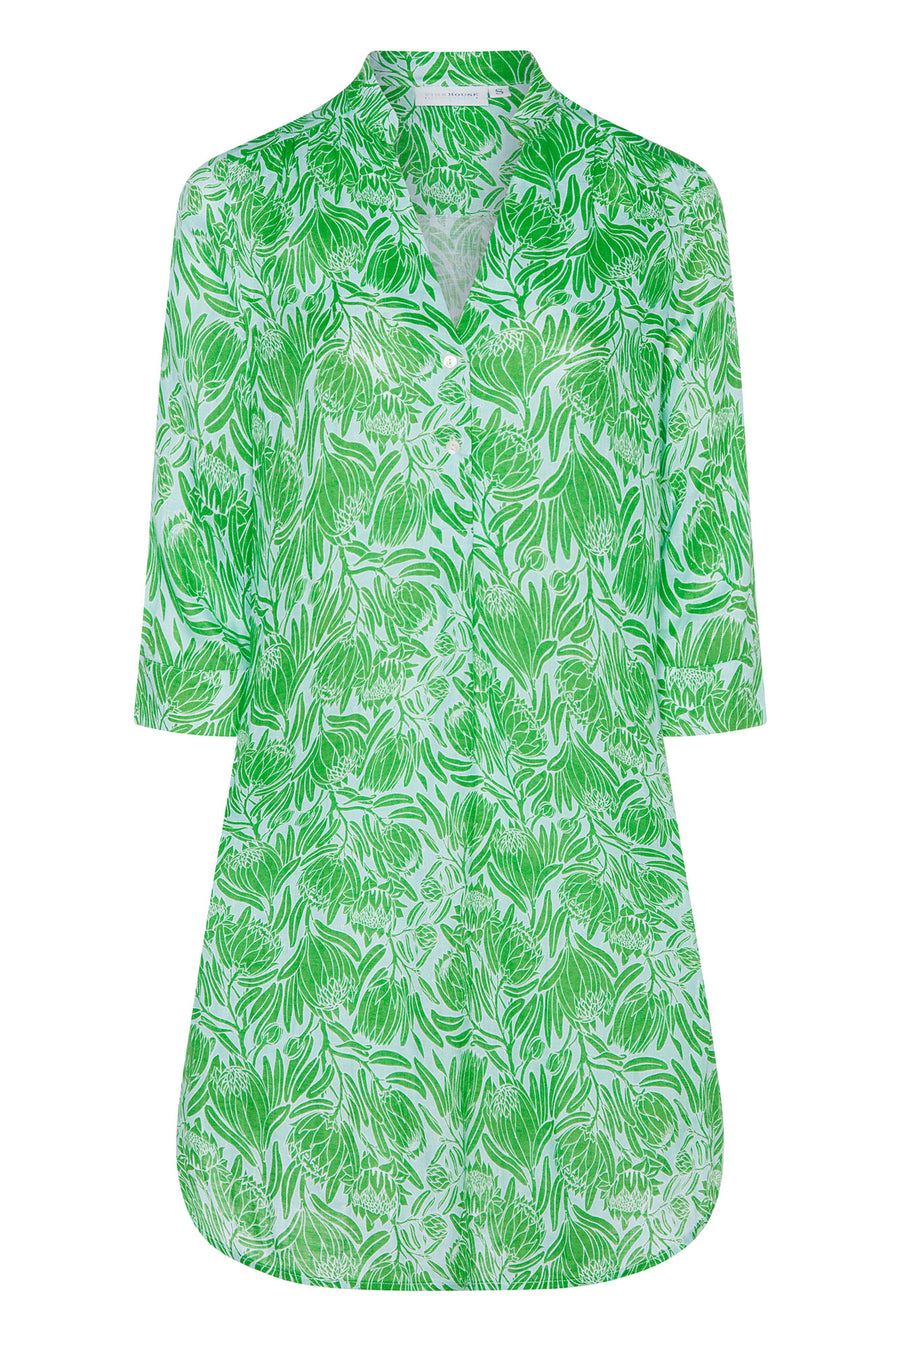 Luxury resort style womens dress in blue green floral Protea print by Lotty B for Pink House Mustique